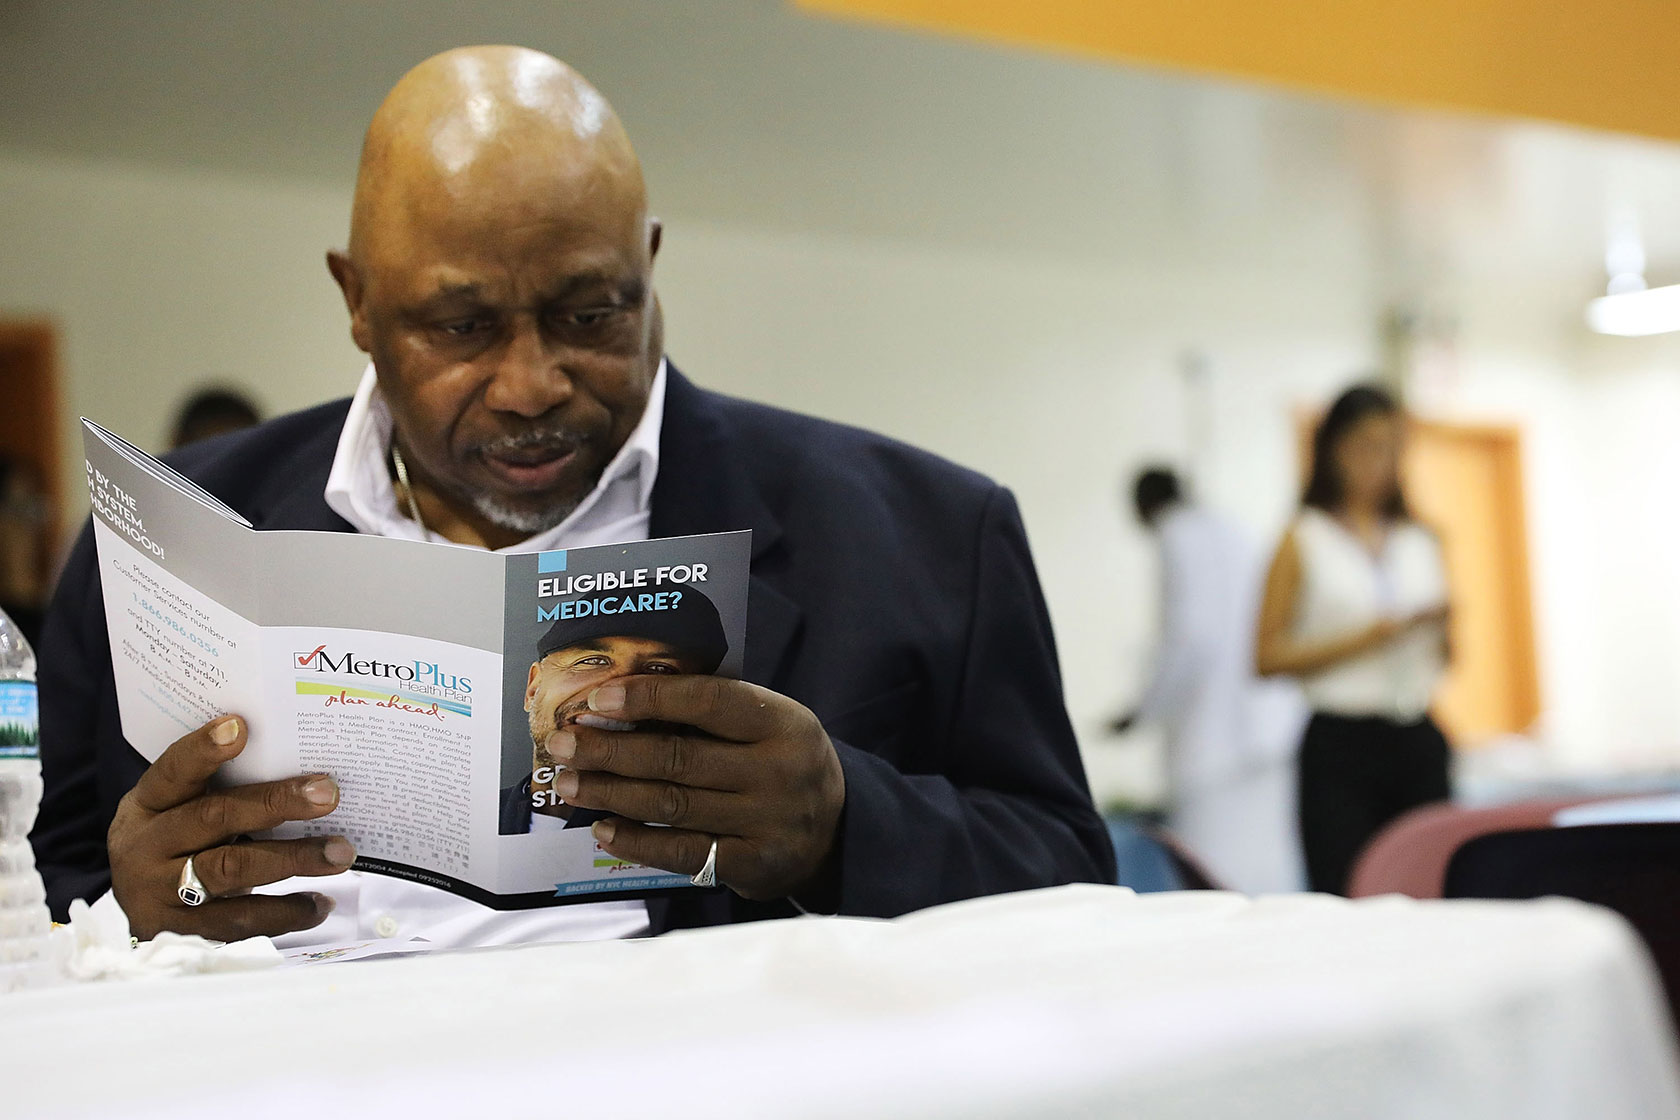 A man reads literature on Medicare at an event sponsored by MetroPlus in New York City.